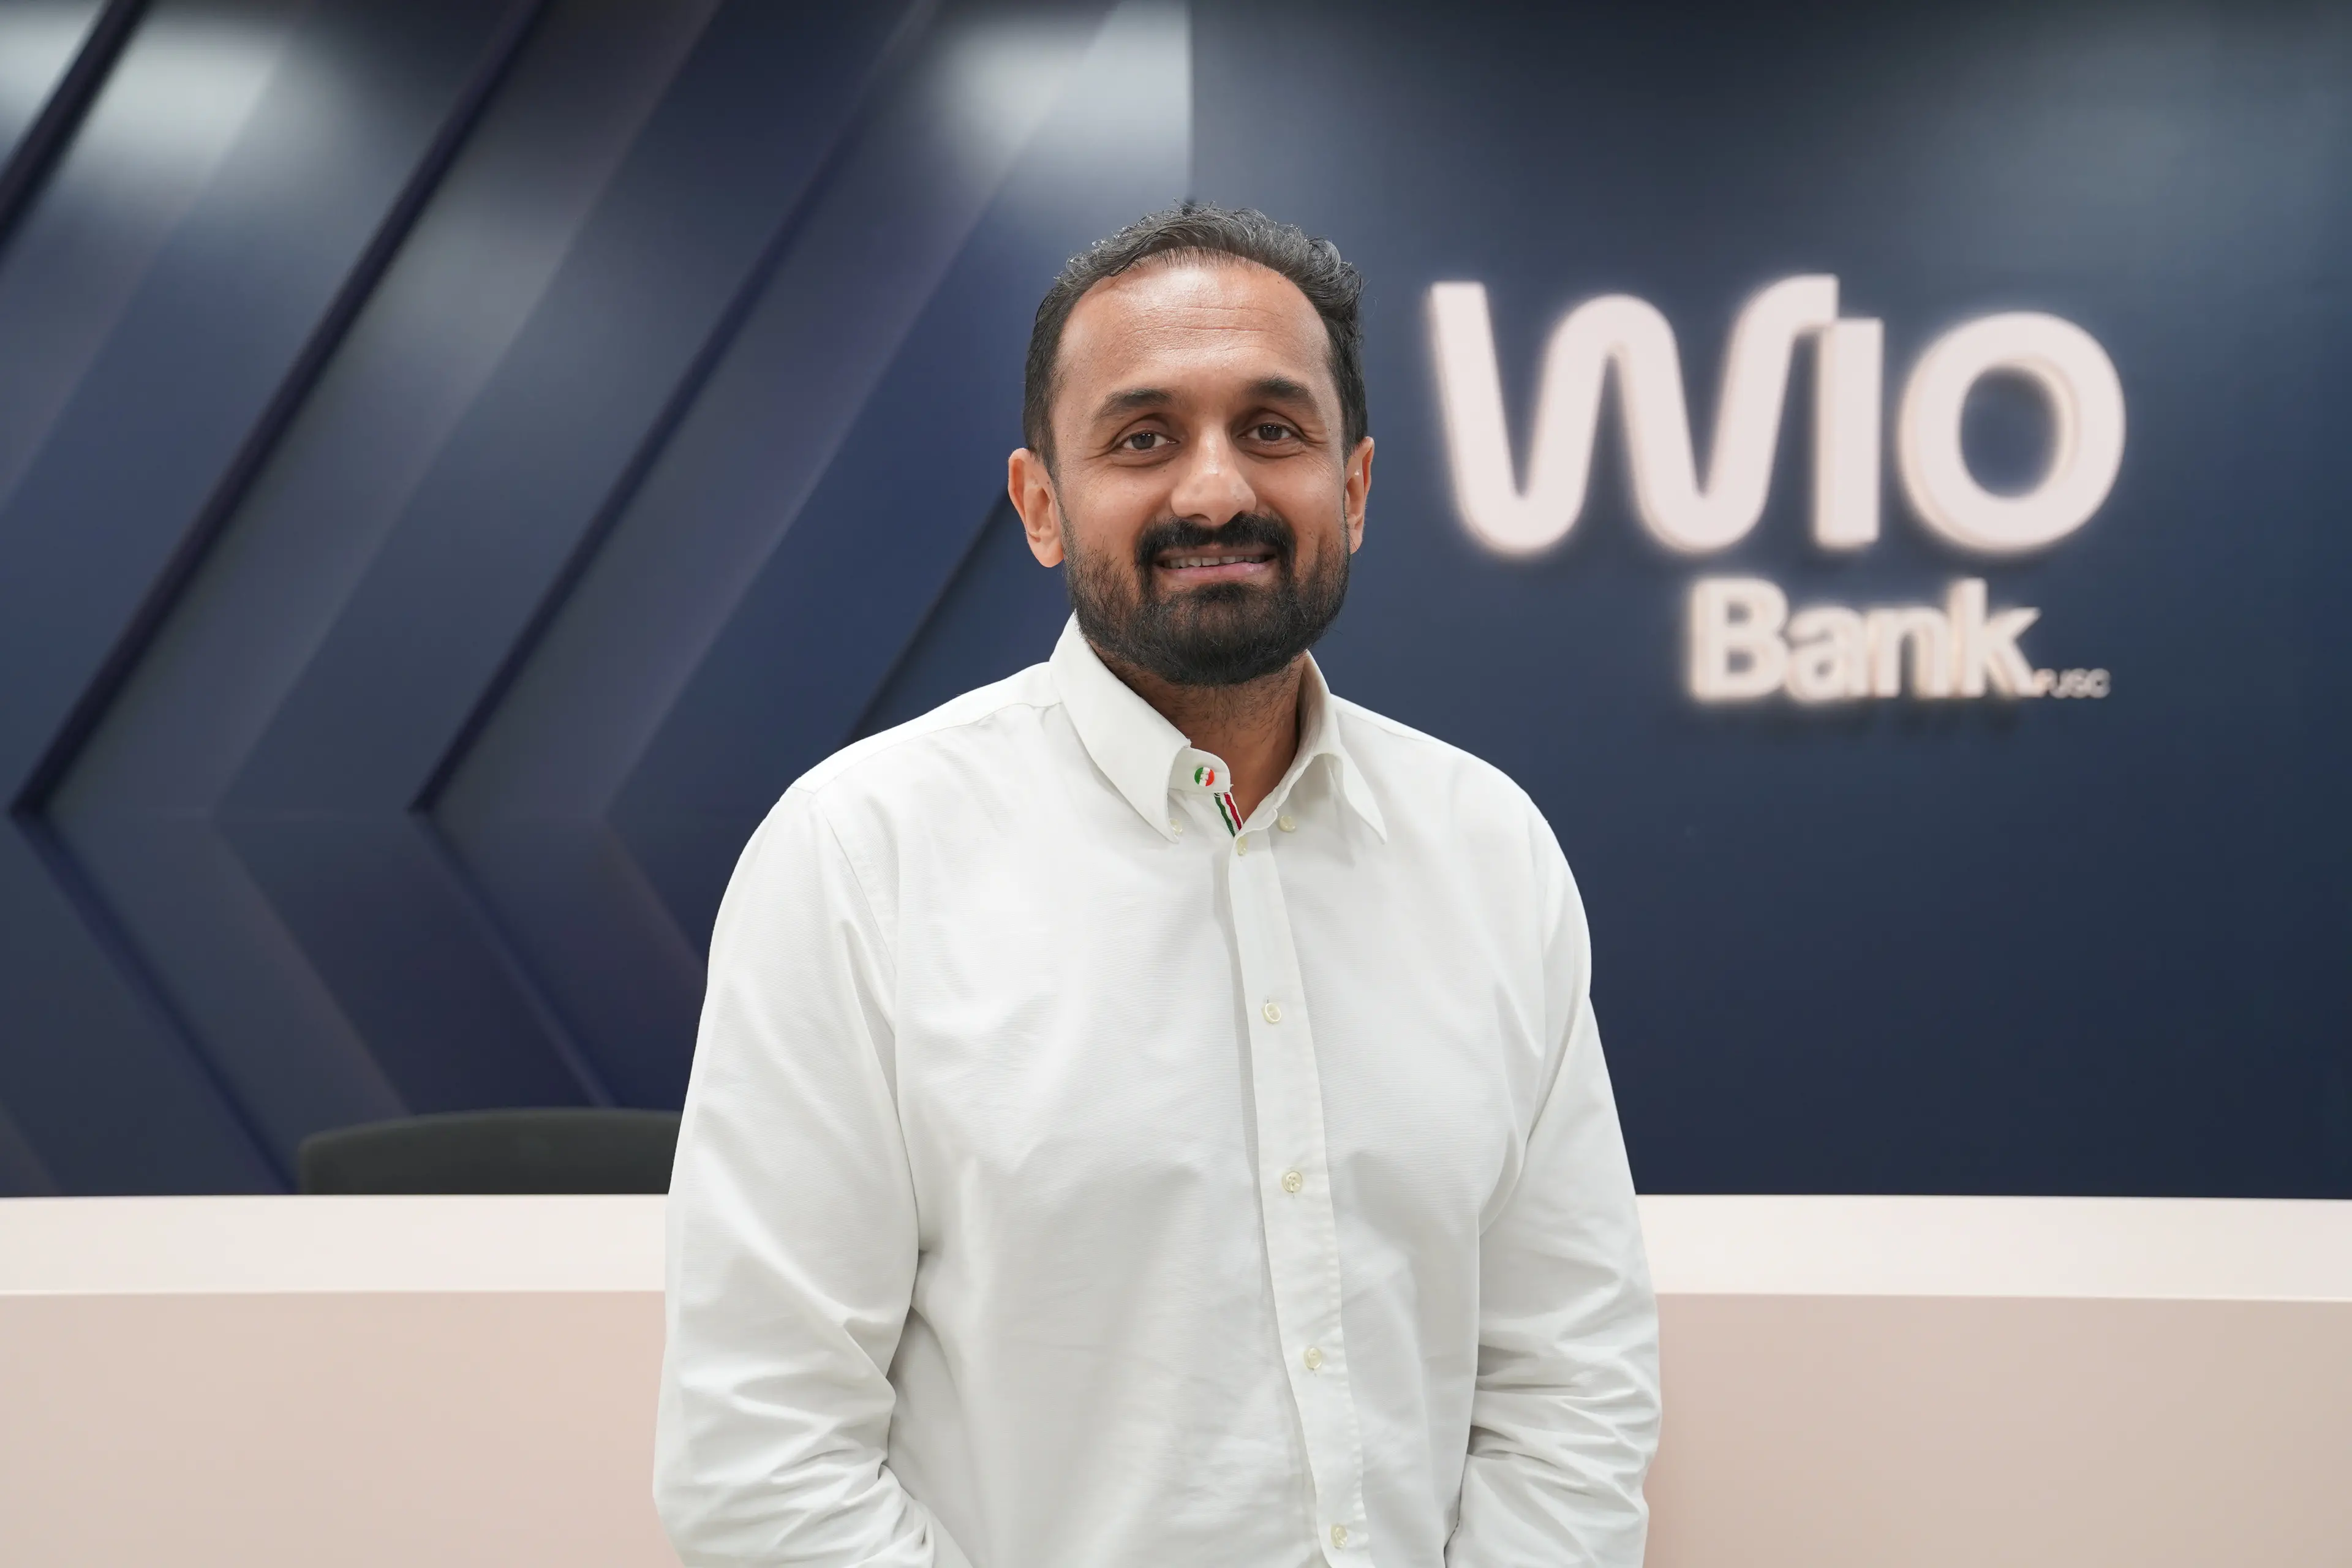 Abu Dhabi's Wio to launch retail banking soon, plans global expansion